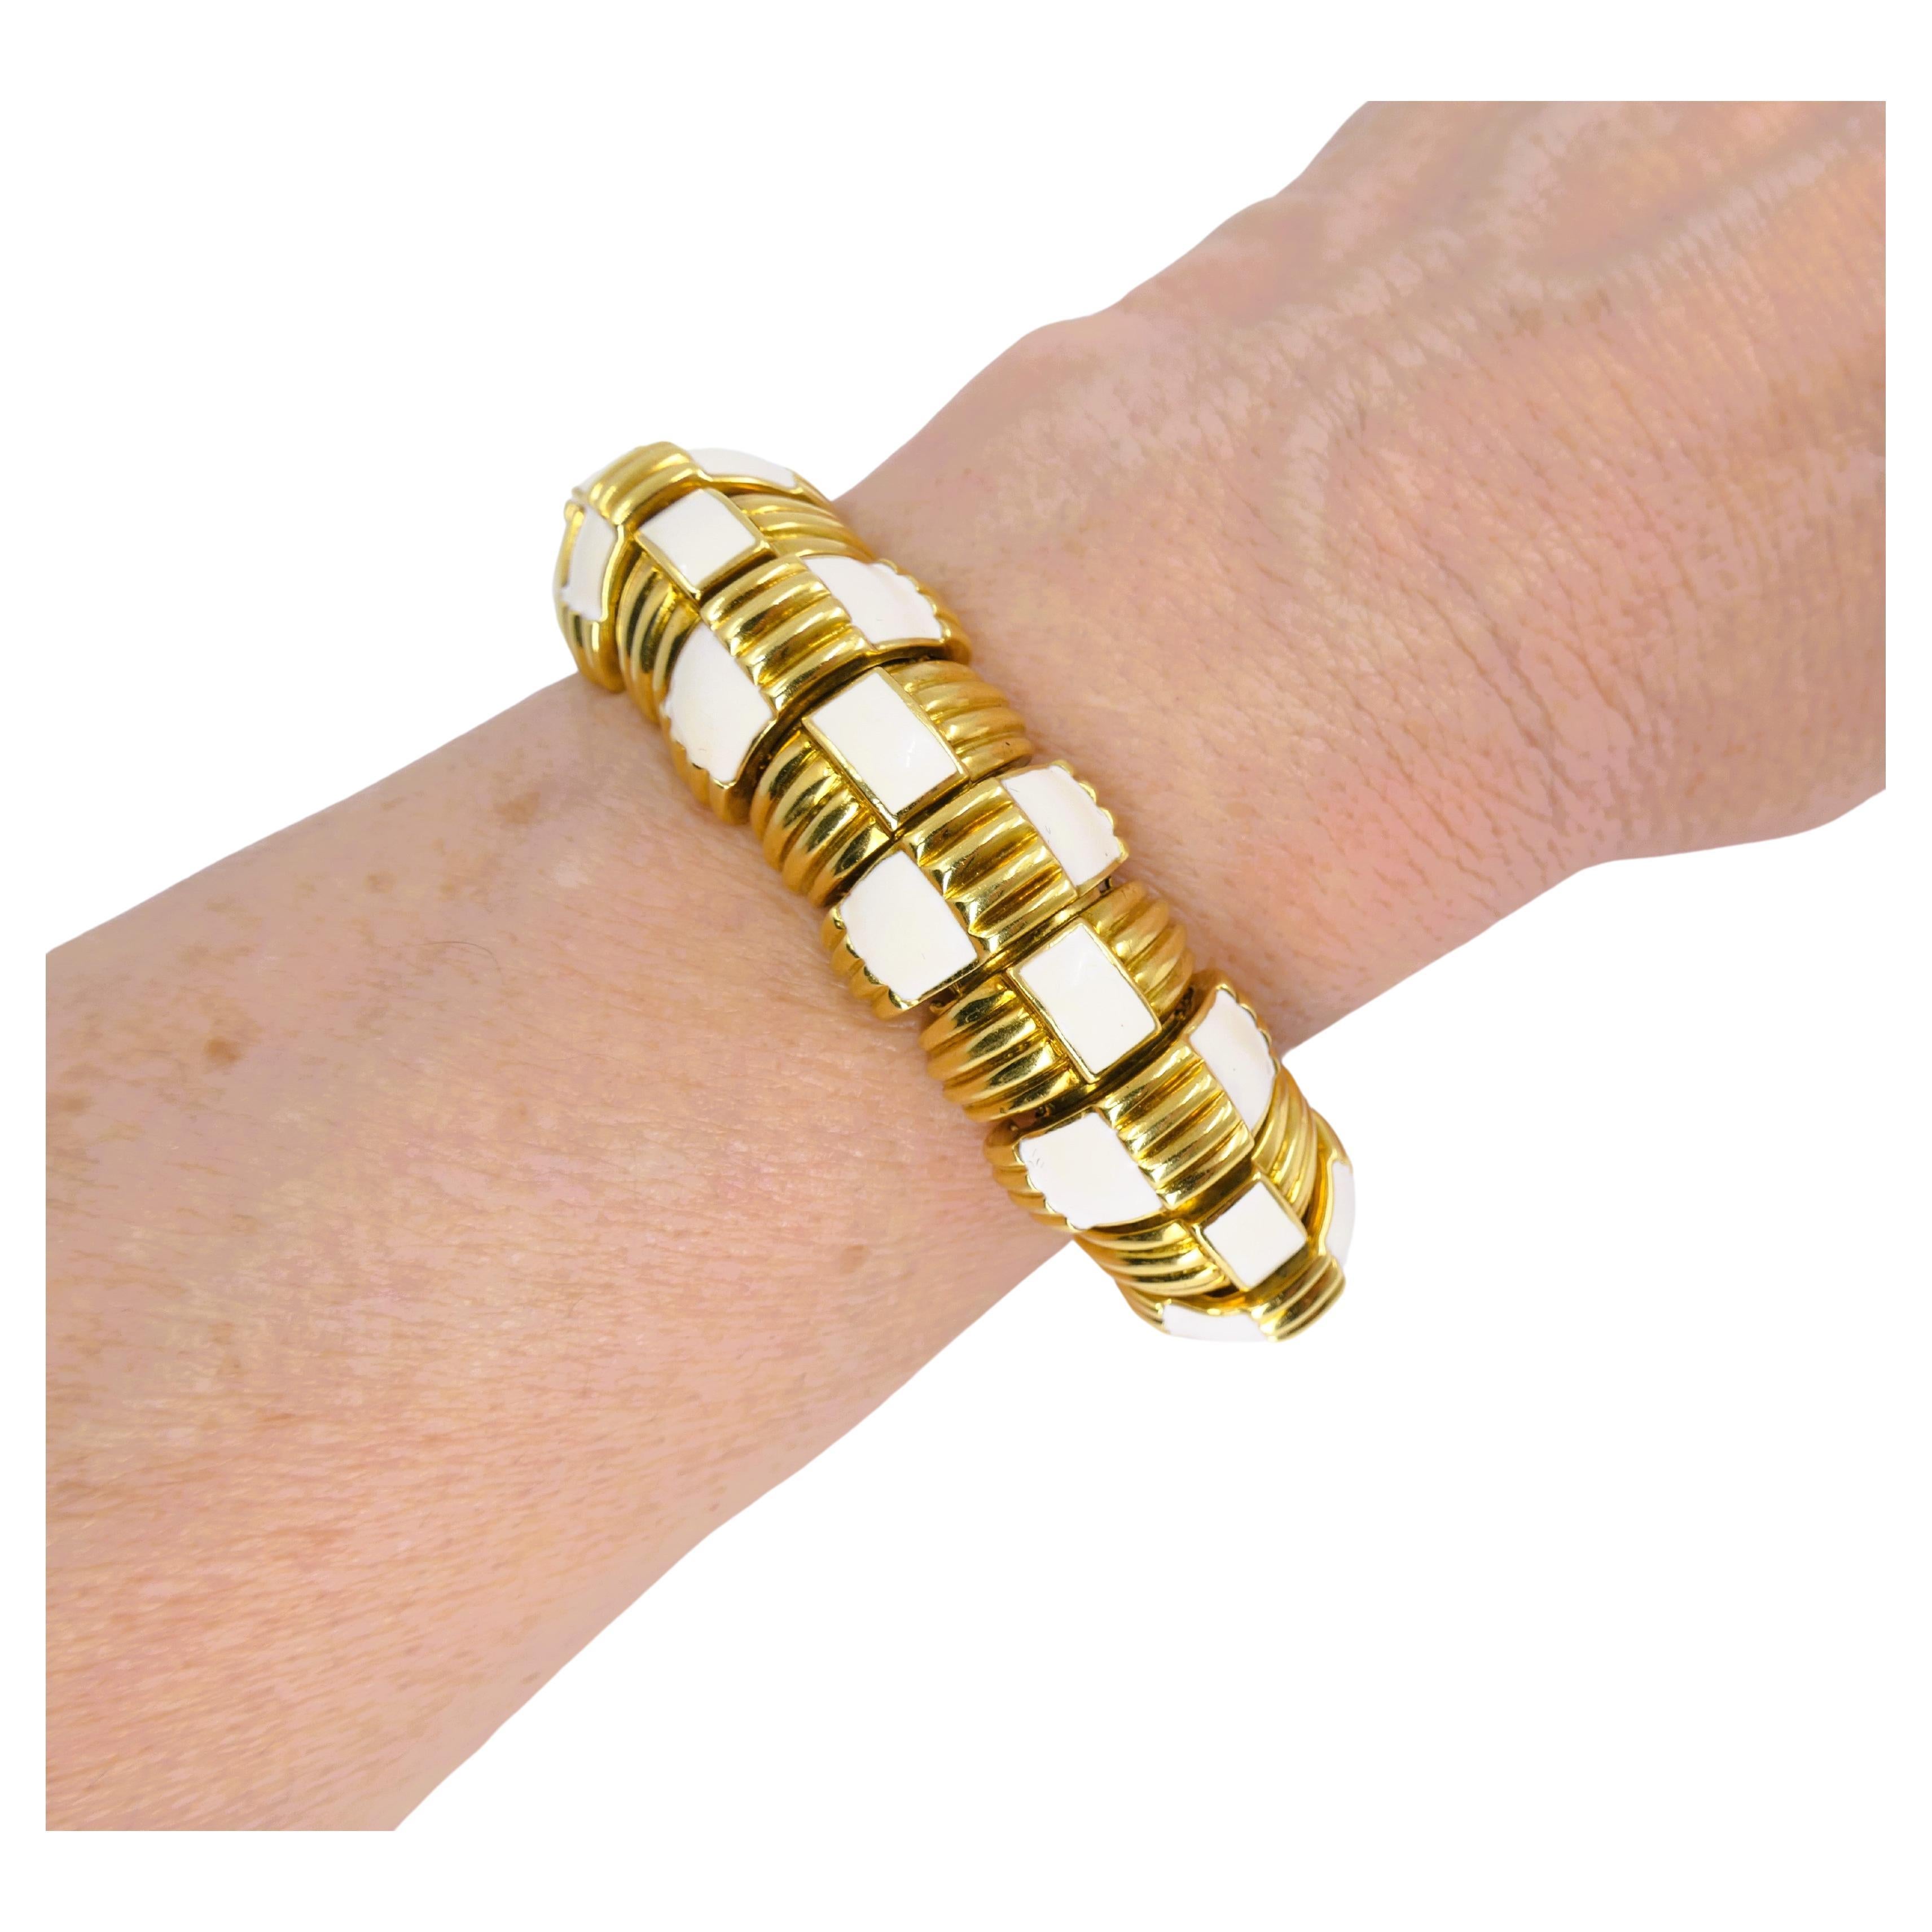 A gorgeous David Webb 18k gold bracelet with white enamel.
The bracelet is crafted out of the hemispheric sections that are invisibly connected to create a flexible bracelet. The gold sections alternate with the painted enamel pattern. Ribbed